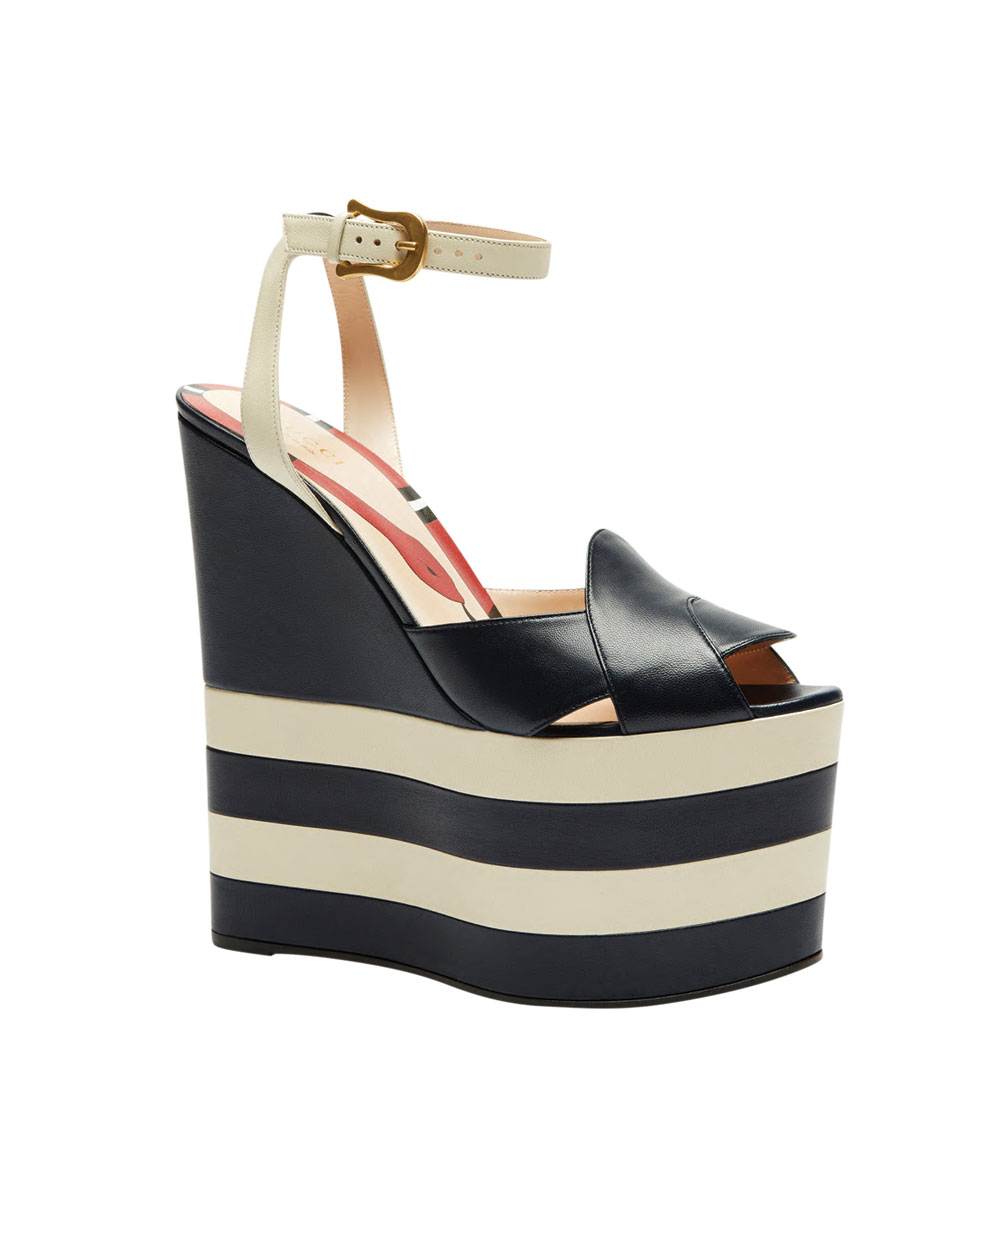 Gucci wedges, $1255